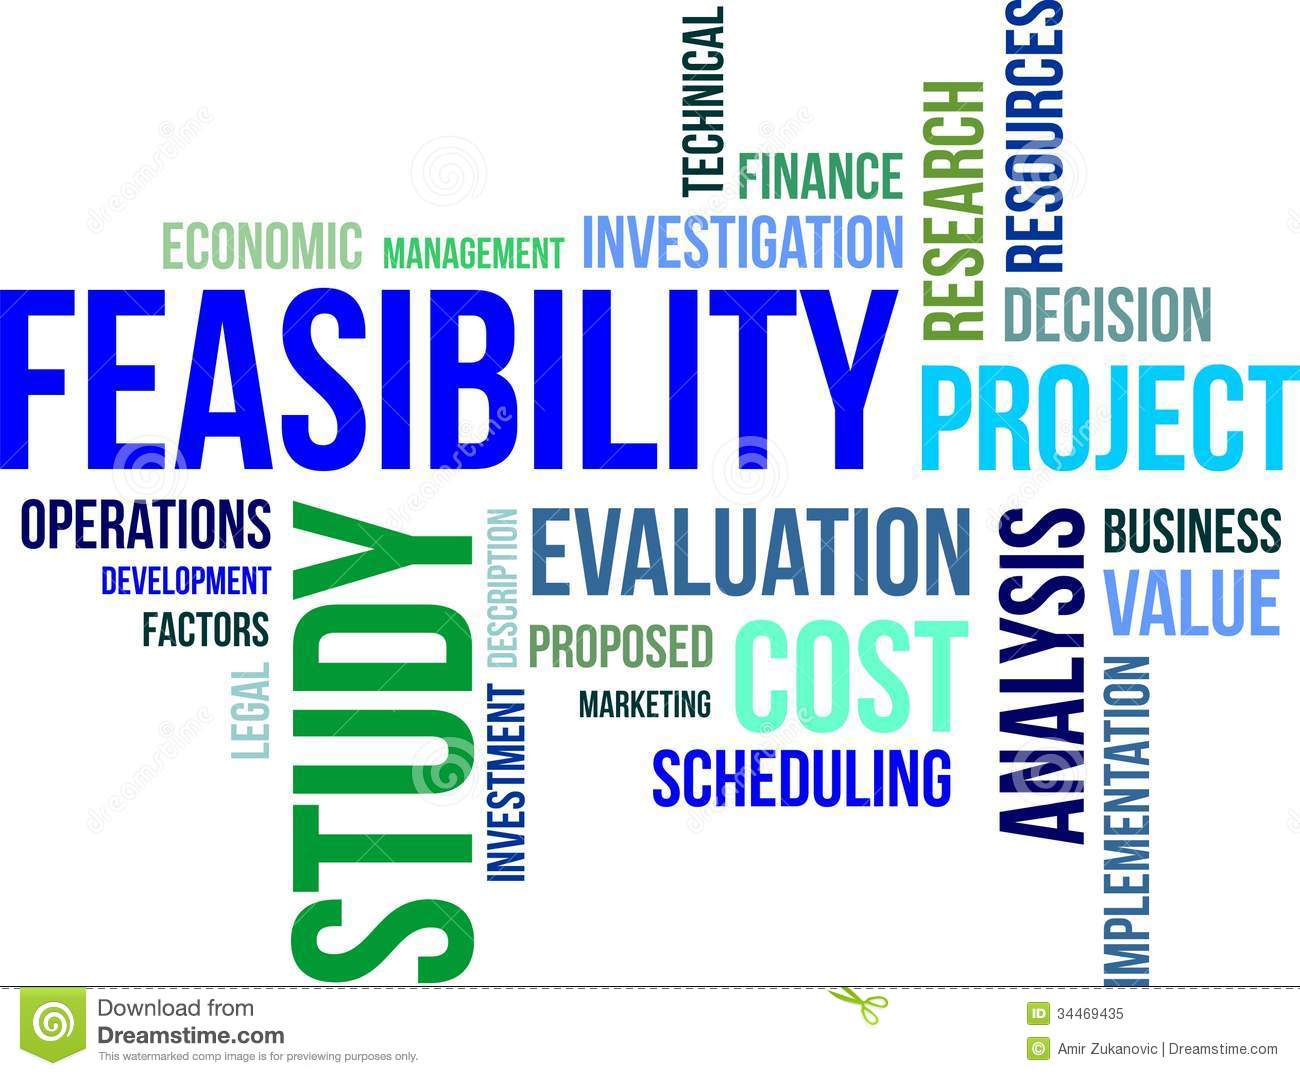 Categories of Feasibility